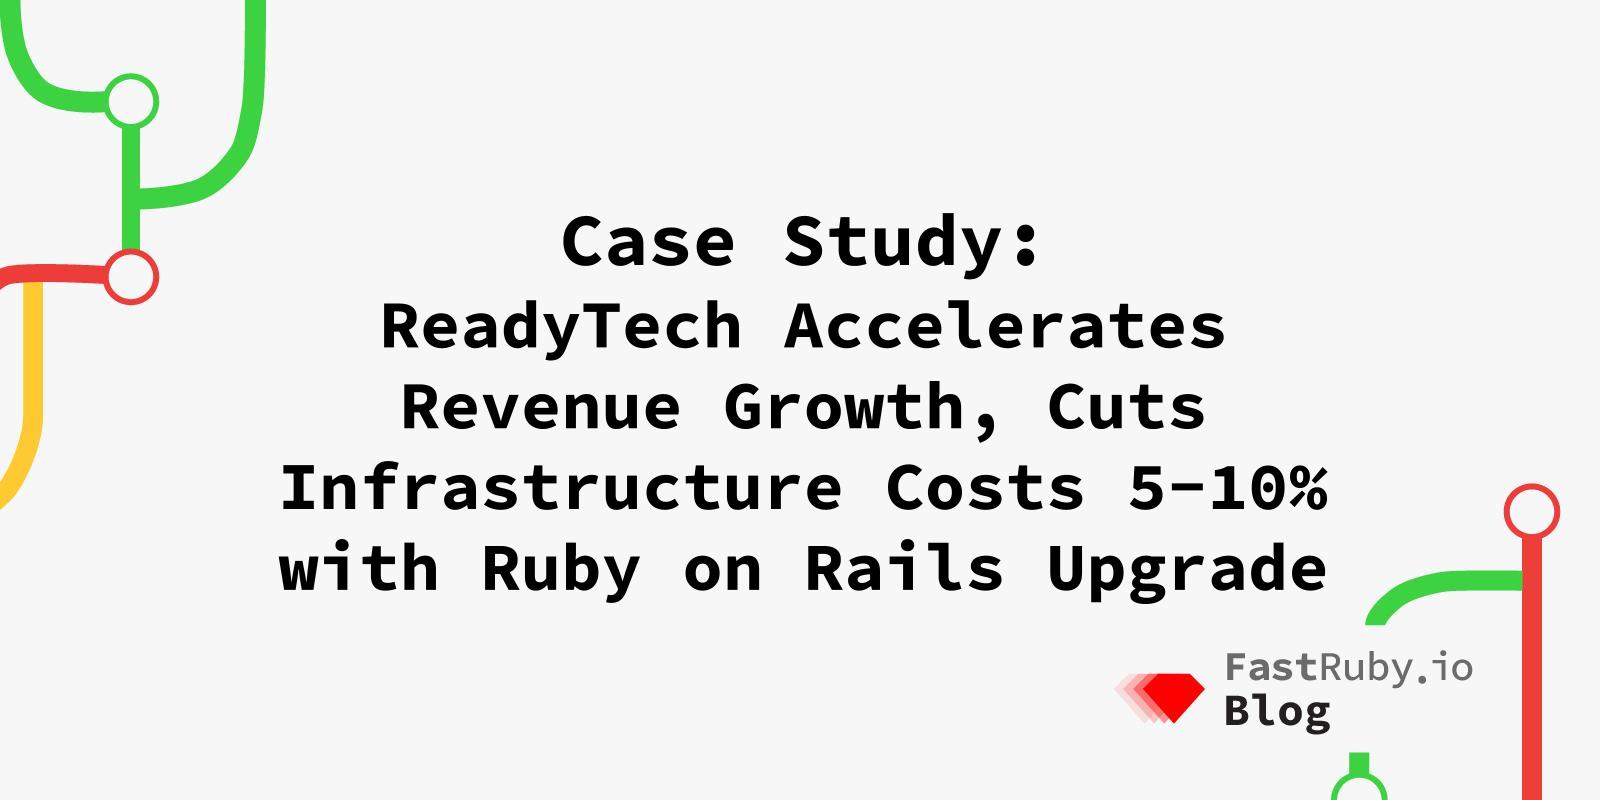 ReadyTech Accelerates Revenue Growth, Cuts Infrastructure Costs 5-10% with Ruby on Rails Upgrade